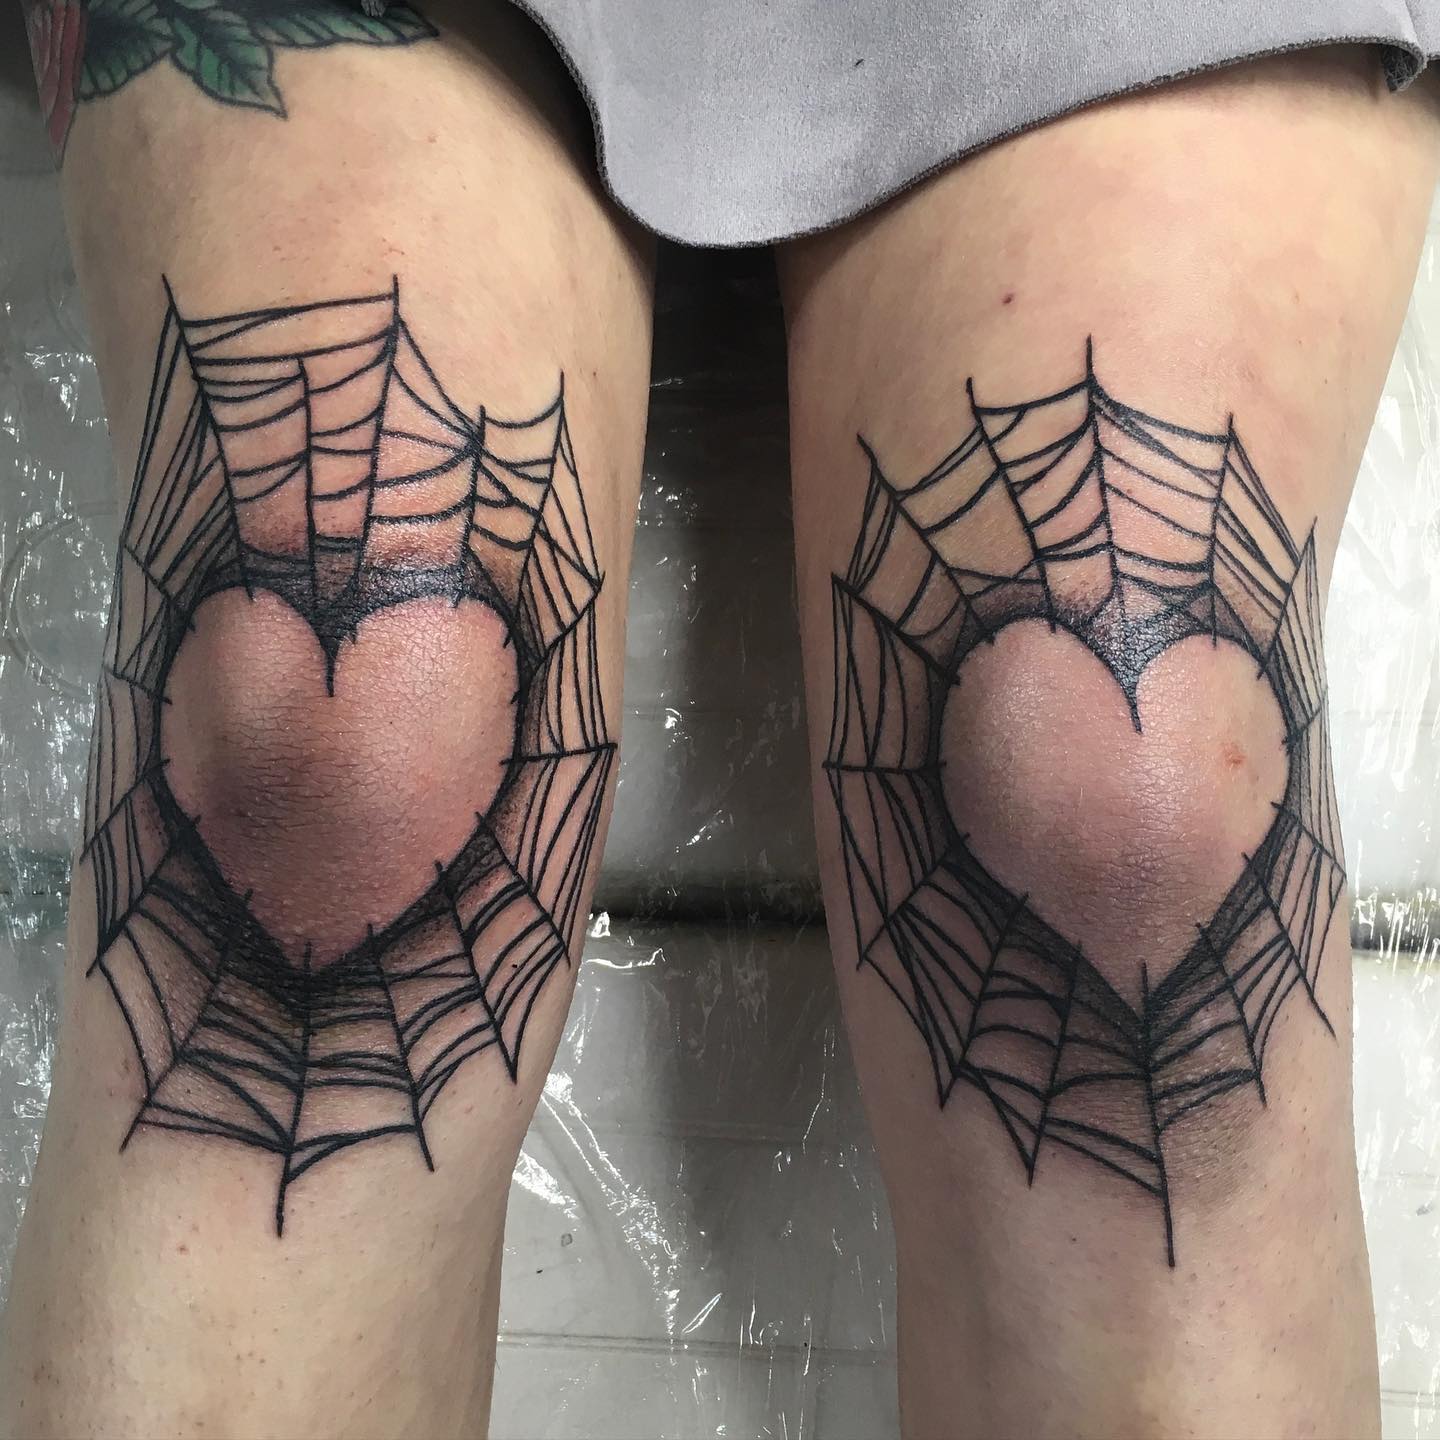 If you’ve been in a tricky love situation that you’re struggling to get out of, this web tattoo is the right pic for you.